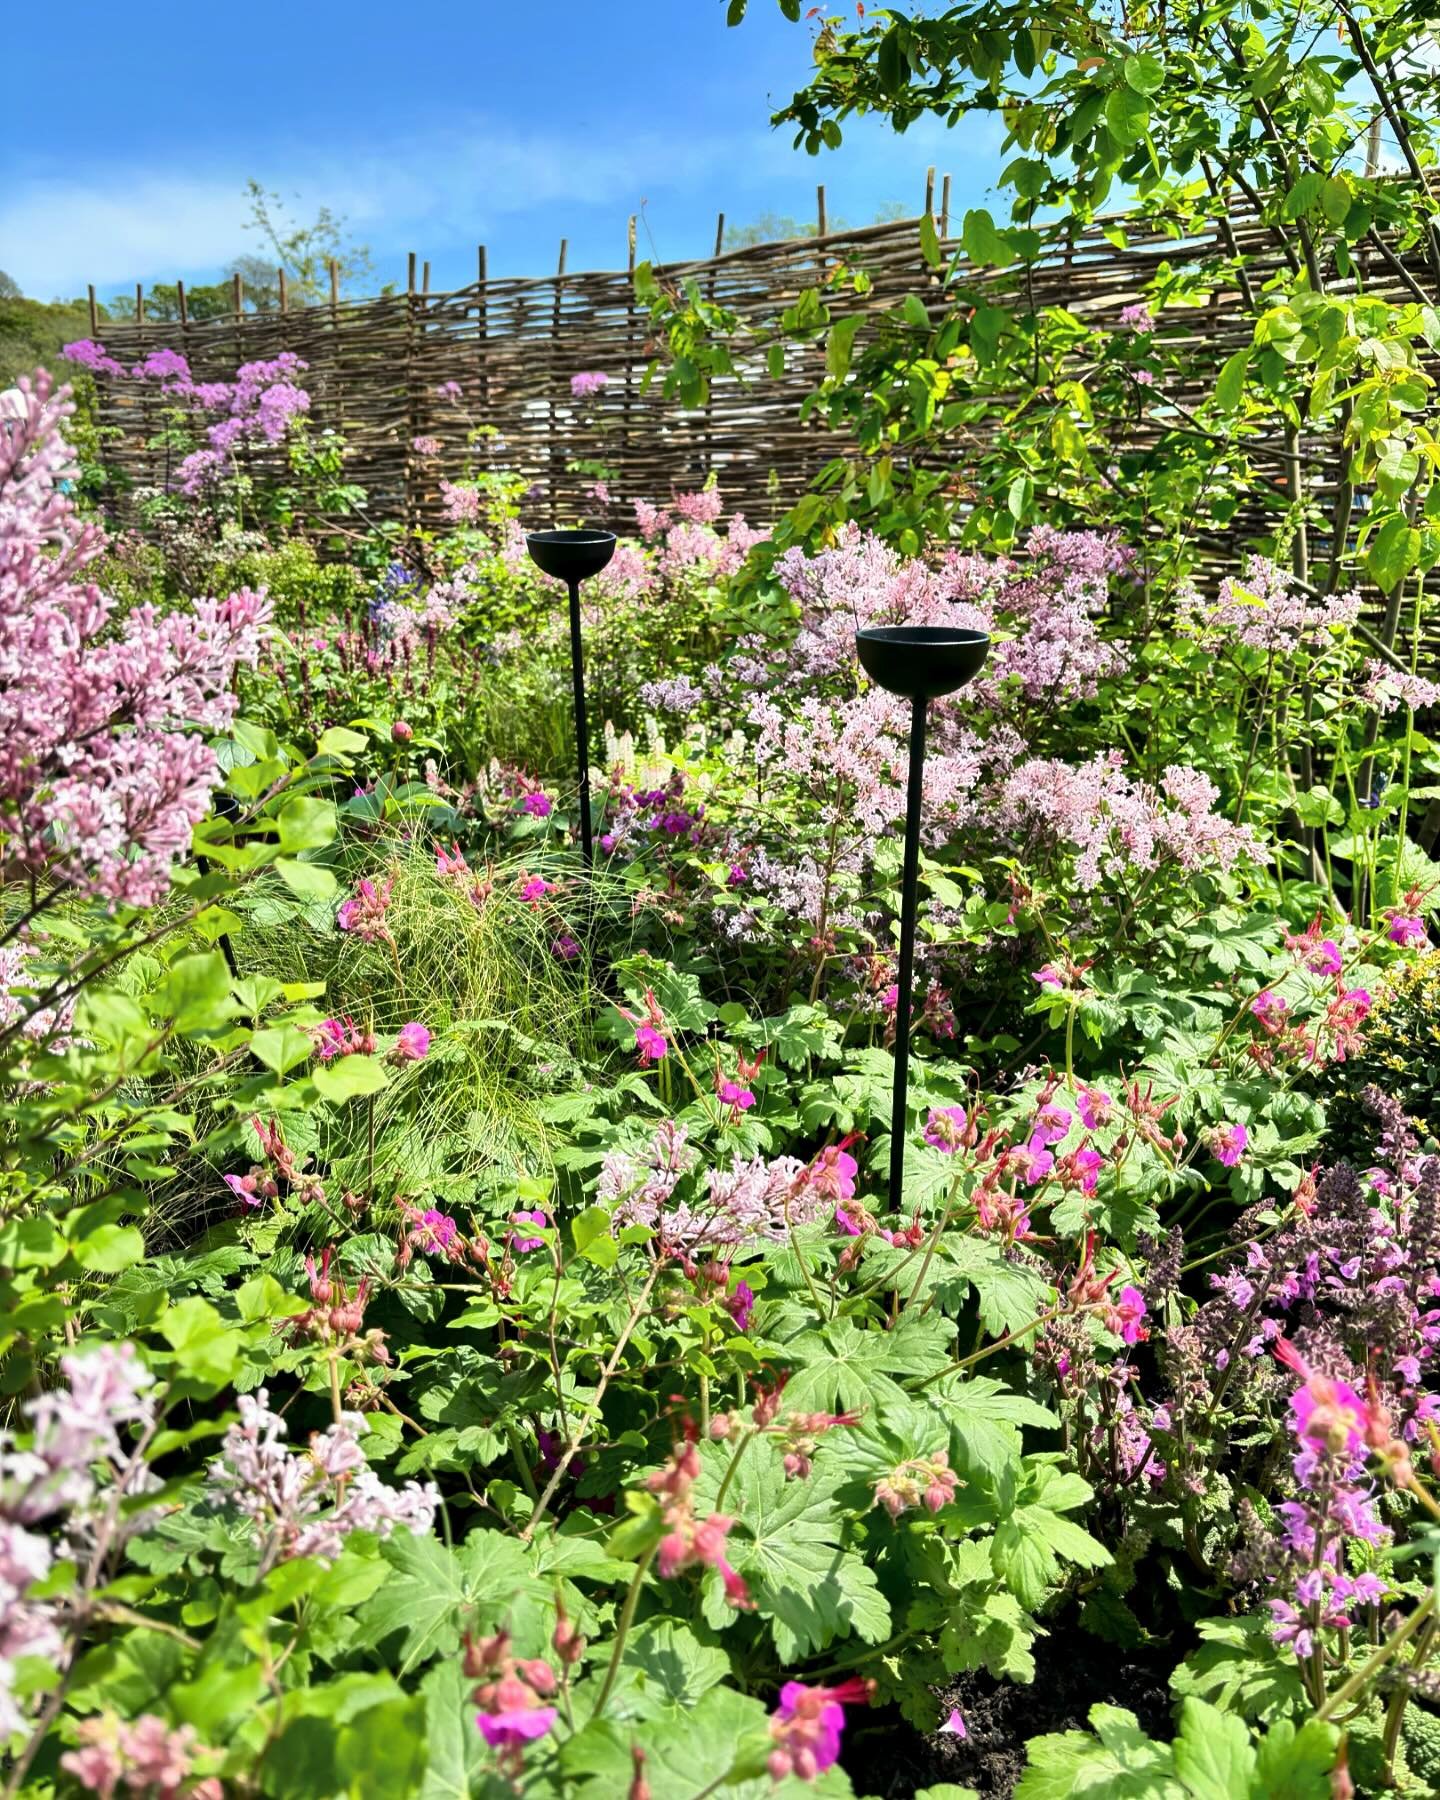 Day 2 of Gardener&rsquo;s World Spring Fair @bbcgwfair.  The sun is shining and our black matte rain catchers from @hurstbourneforgemetal are looking great amongst the lilacs.

#showgarden #beautifulborder #pinkgarden #raincatchers #bbcgwspringfair #